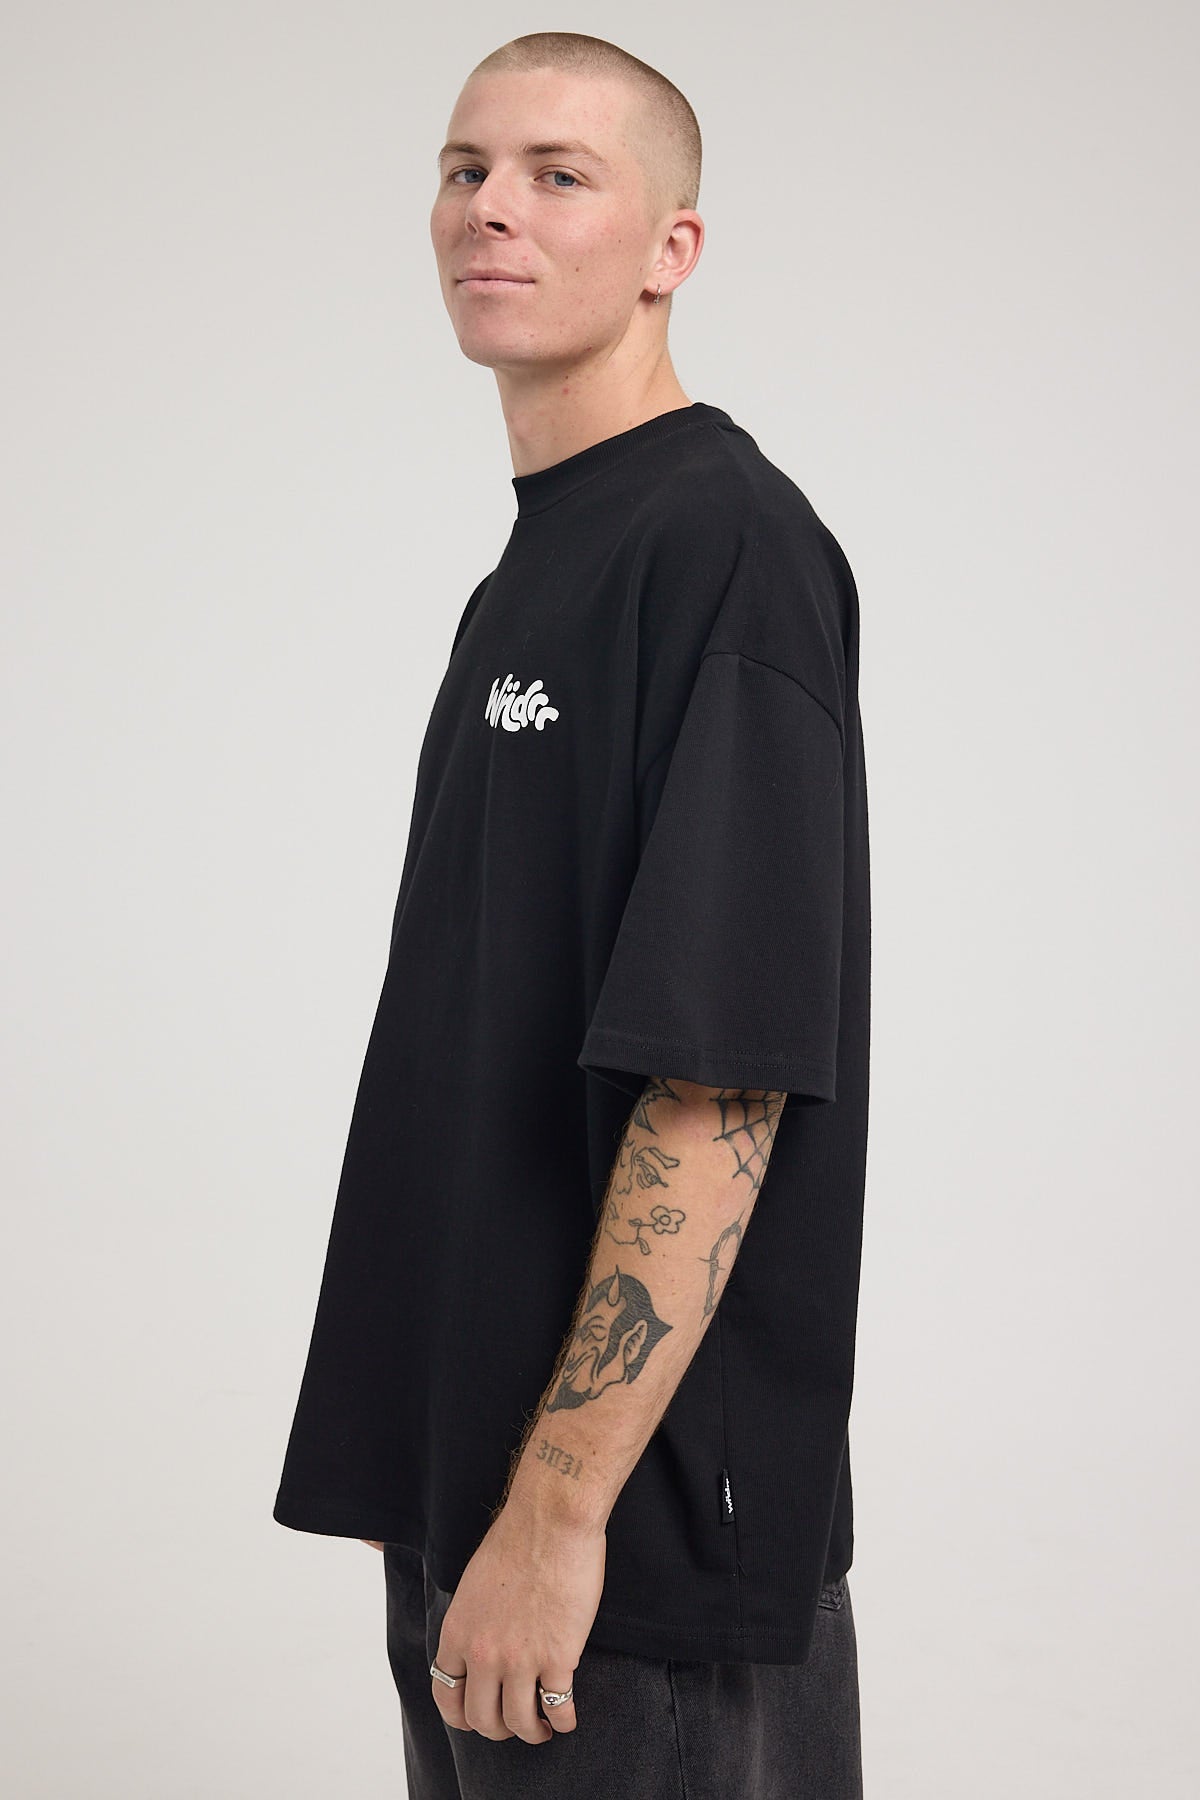 Wndrr All Out Heavy Weight Tee Black Black